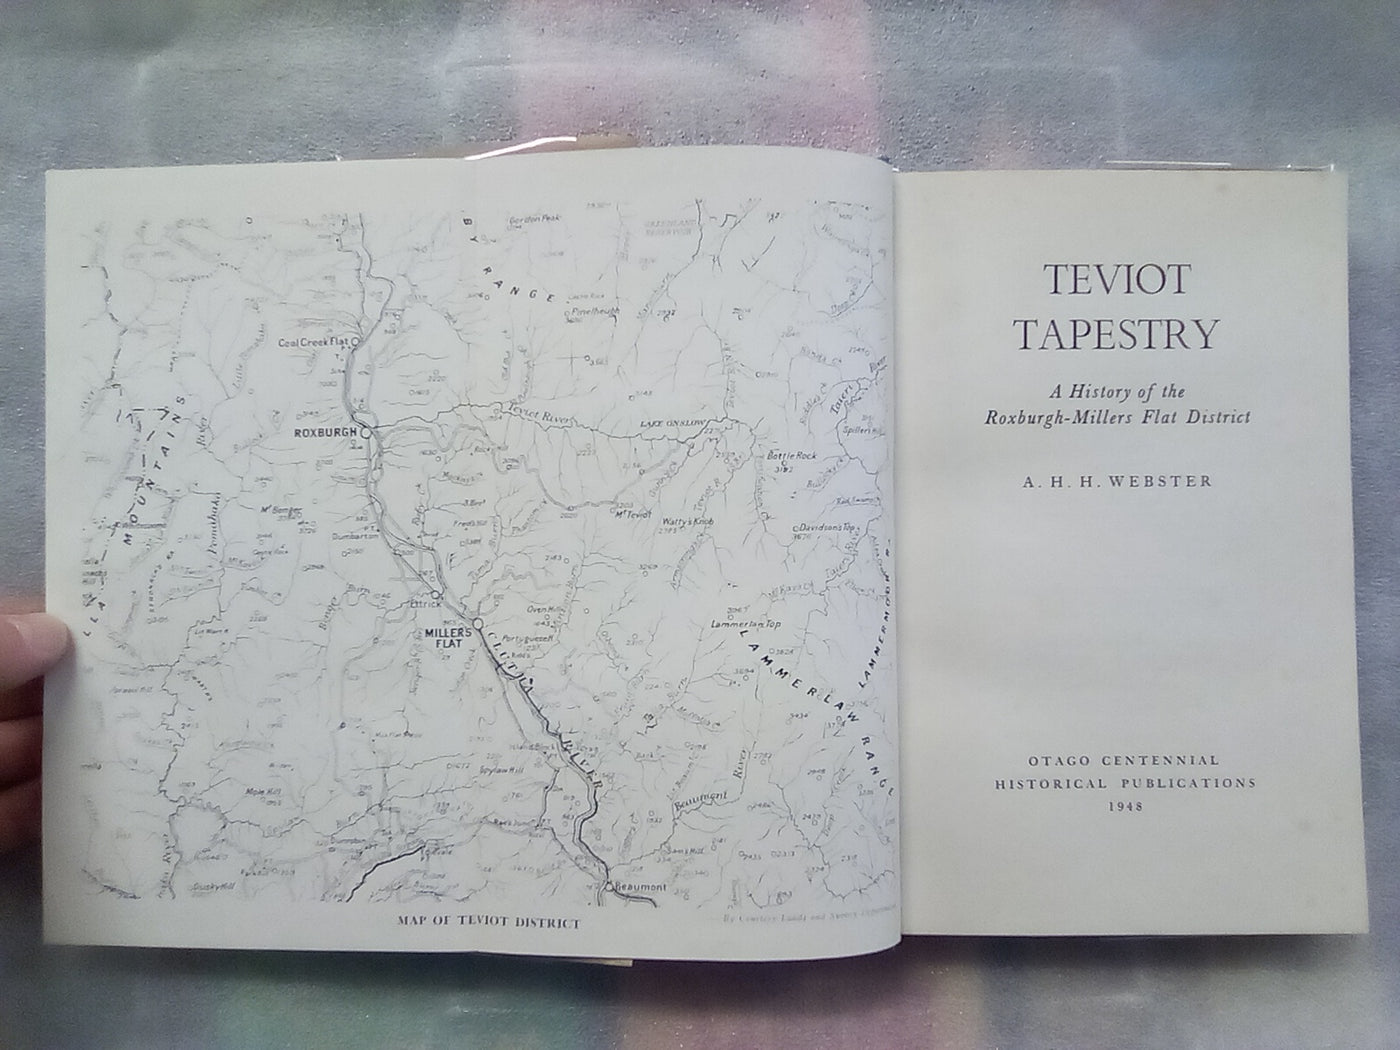 Teviot Tapestry - A History of the Roxburgh - Millers Flat District (1948) by A.H.H. Webster